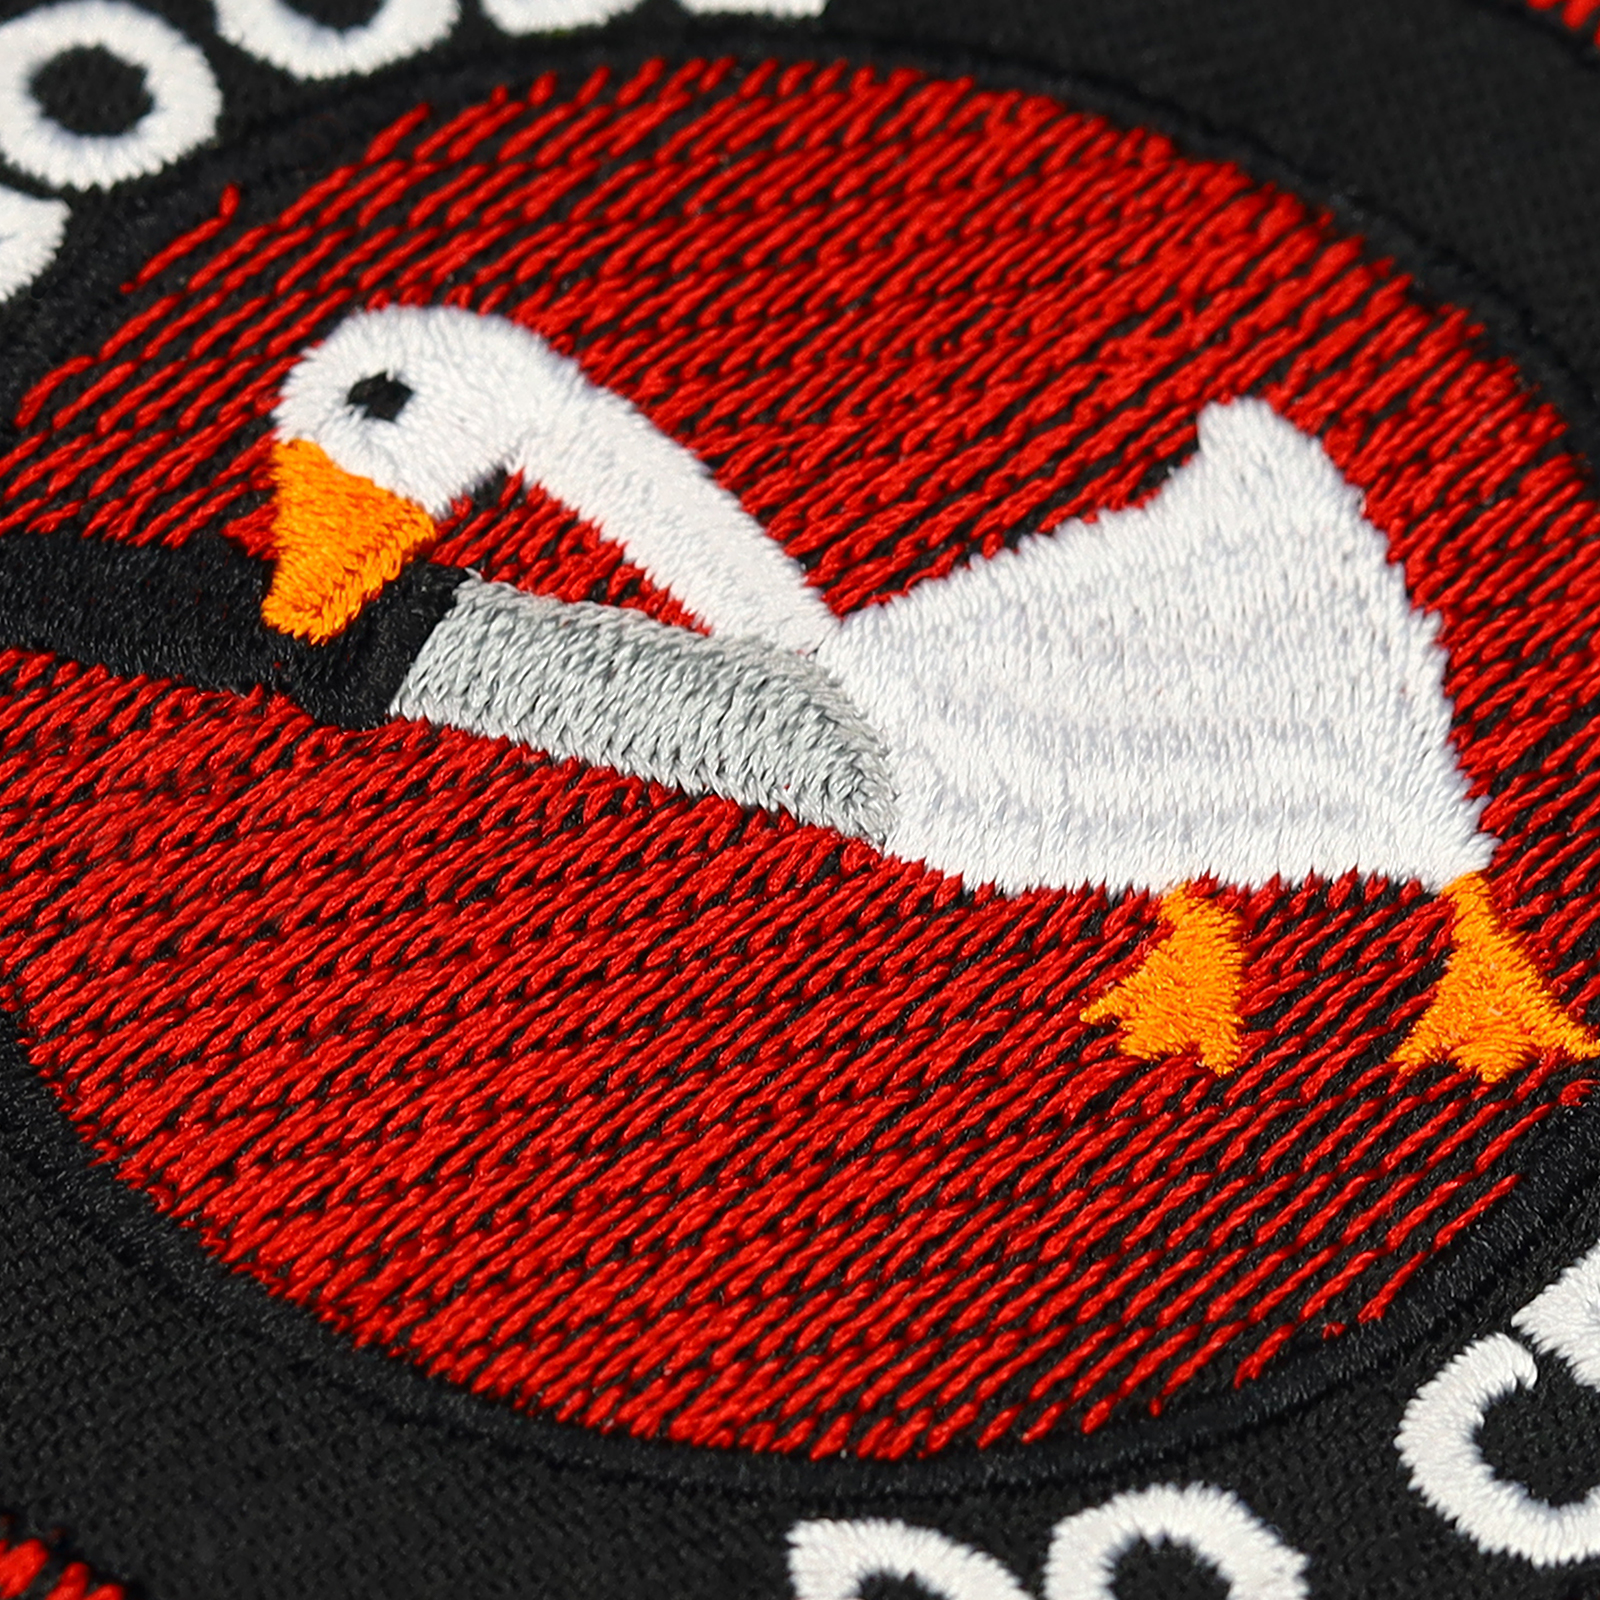 Be goose - do crimes - Patch